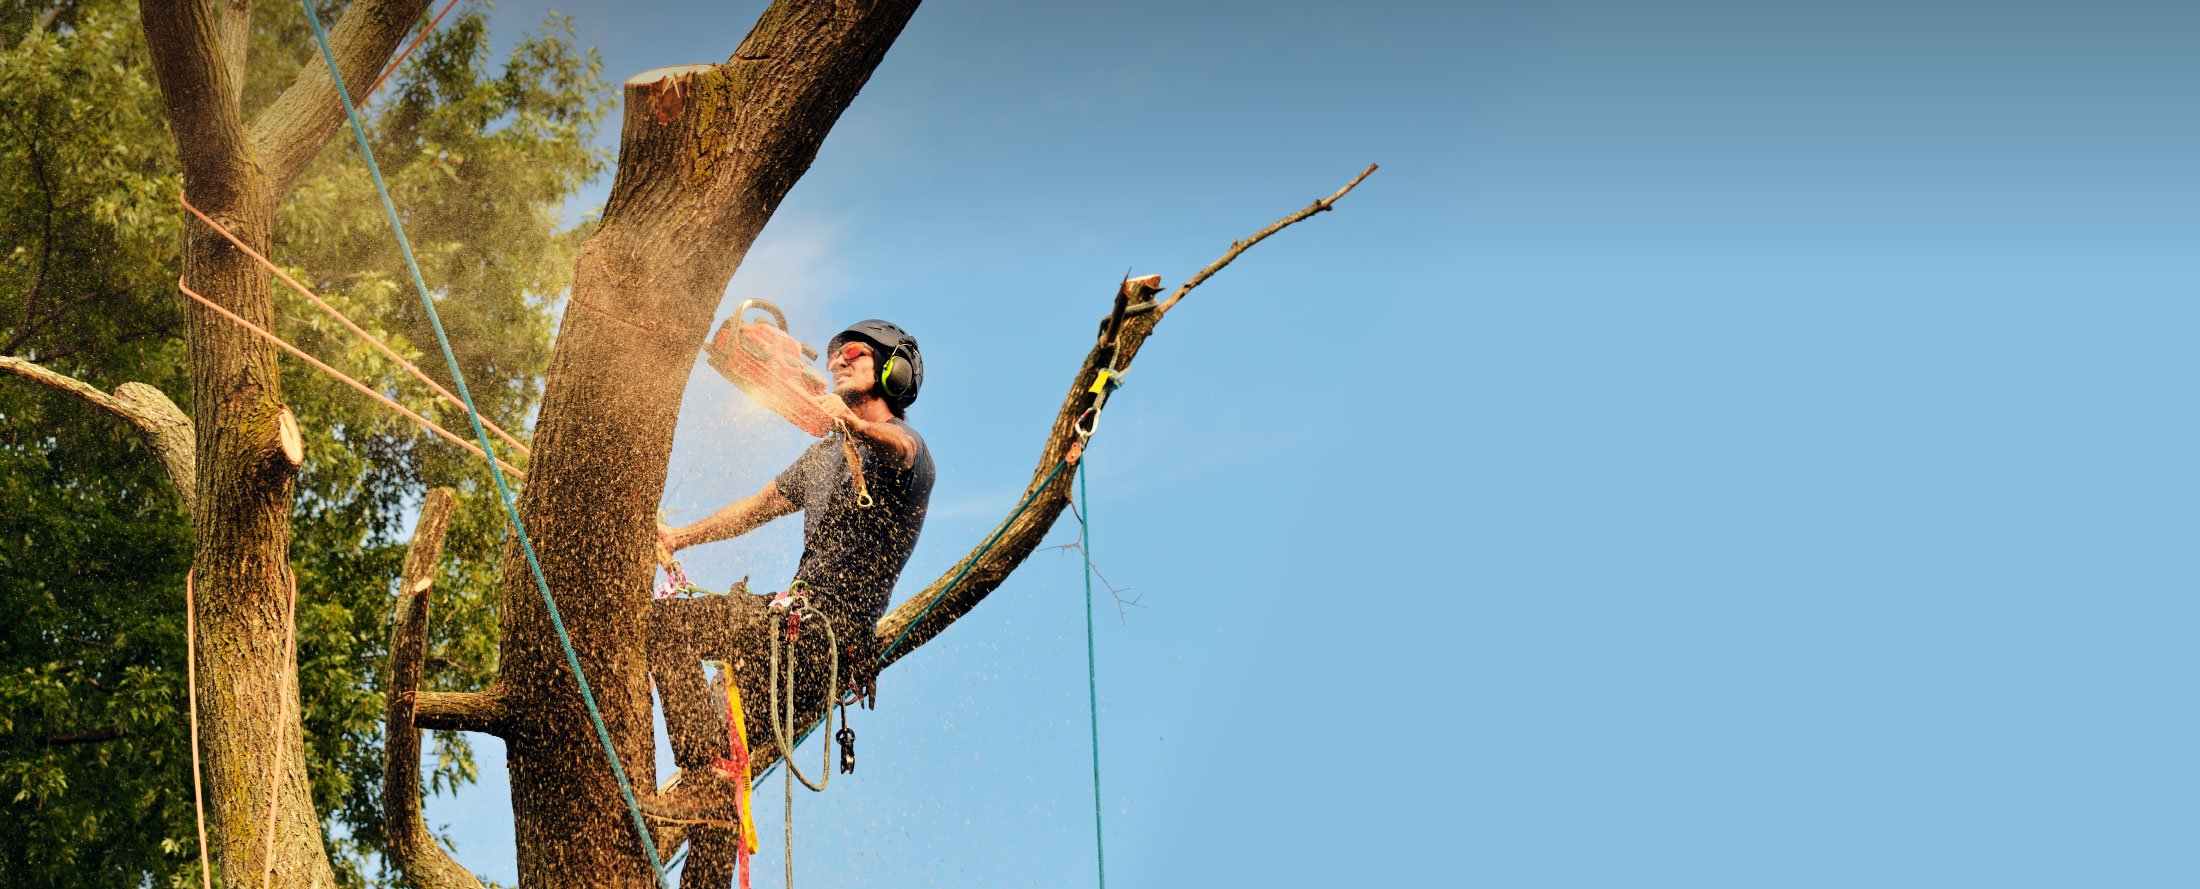 Tree Services Merced